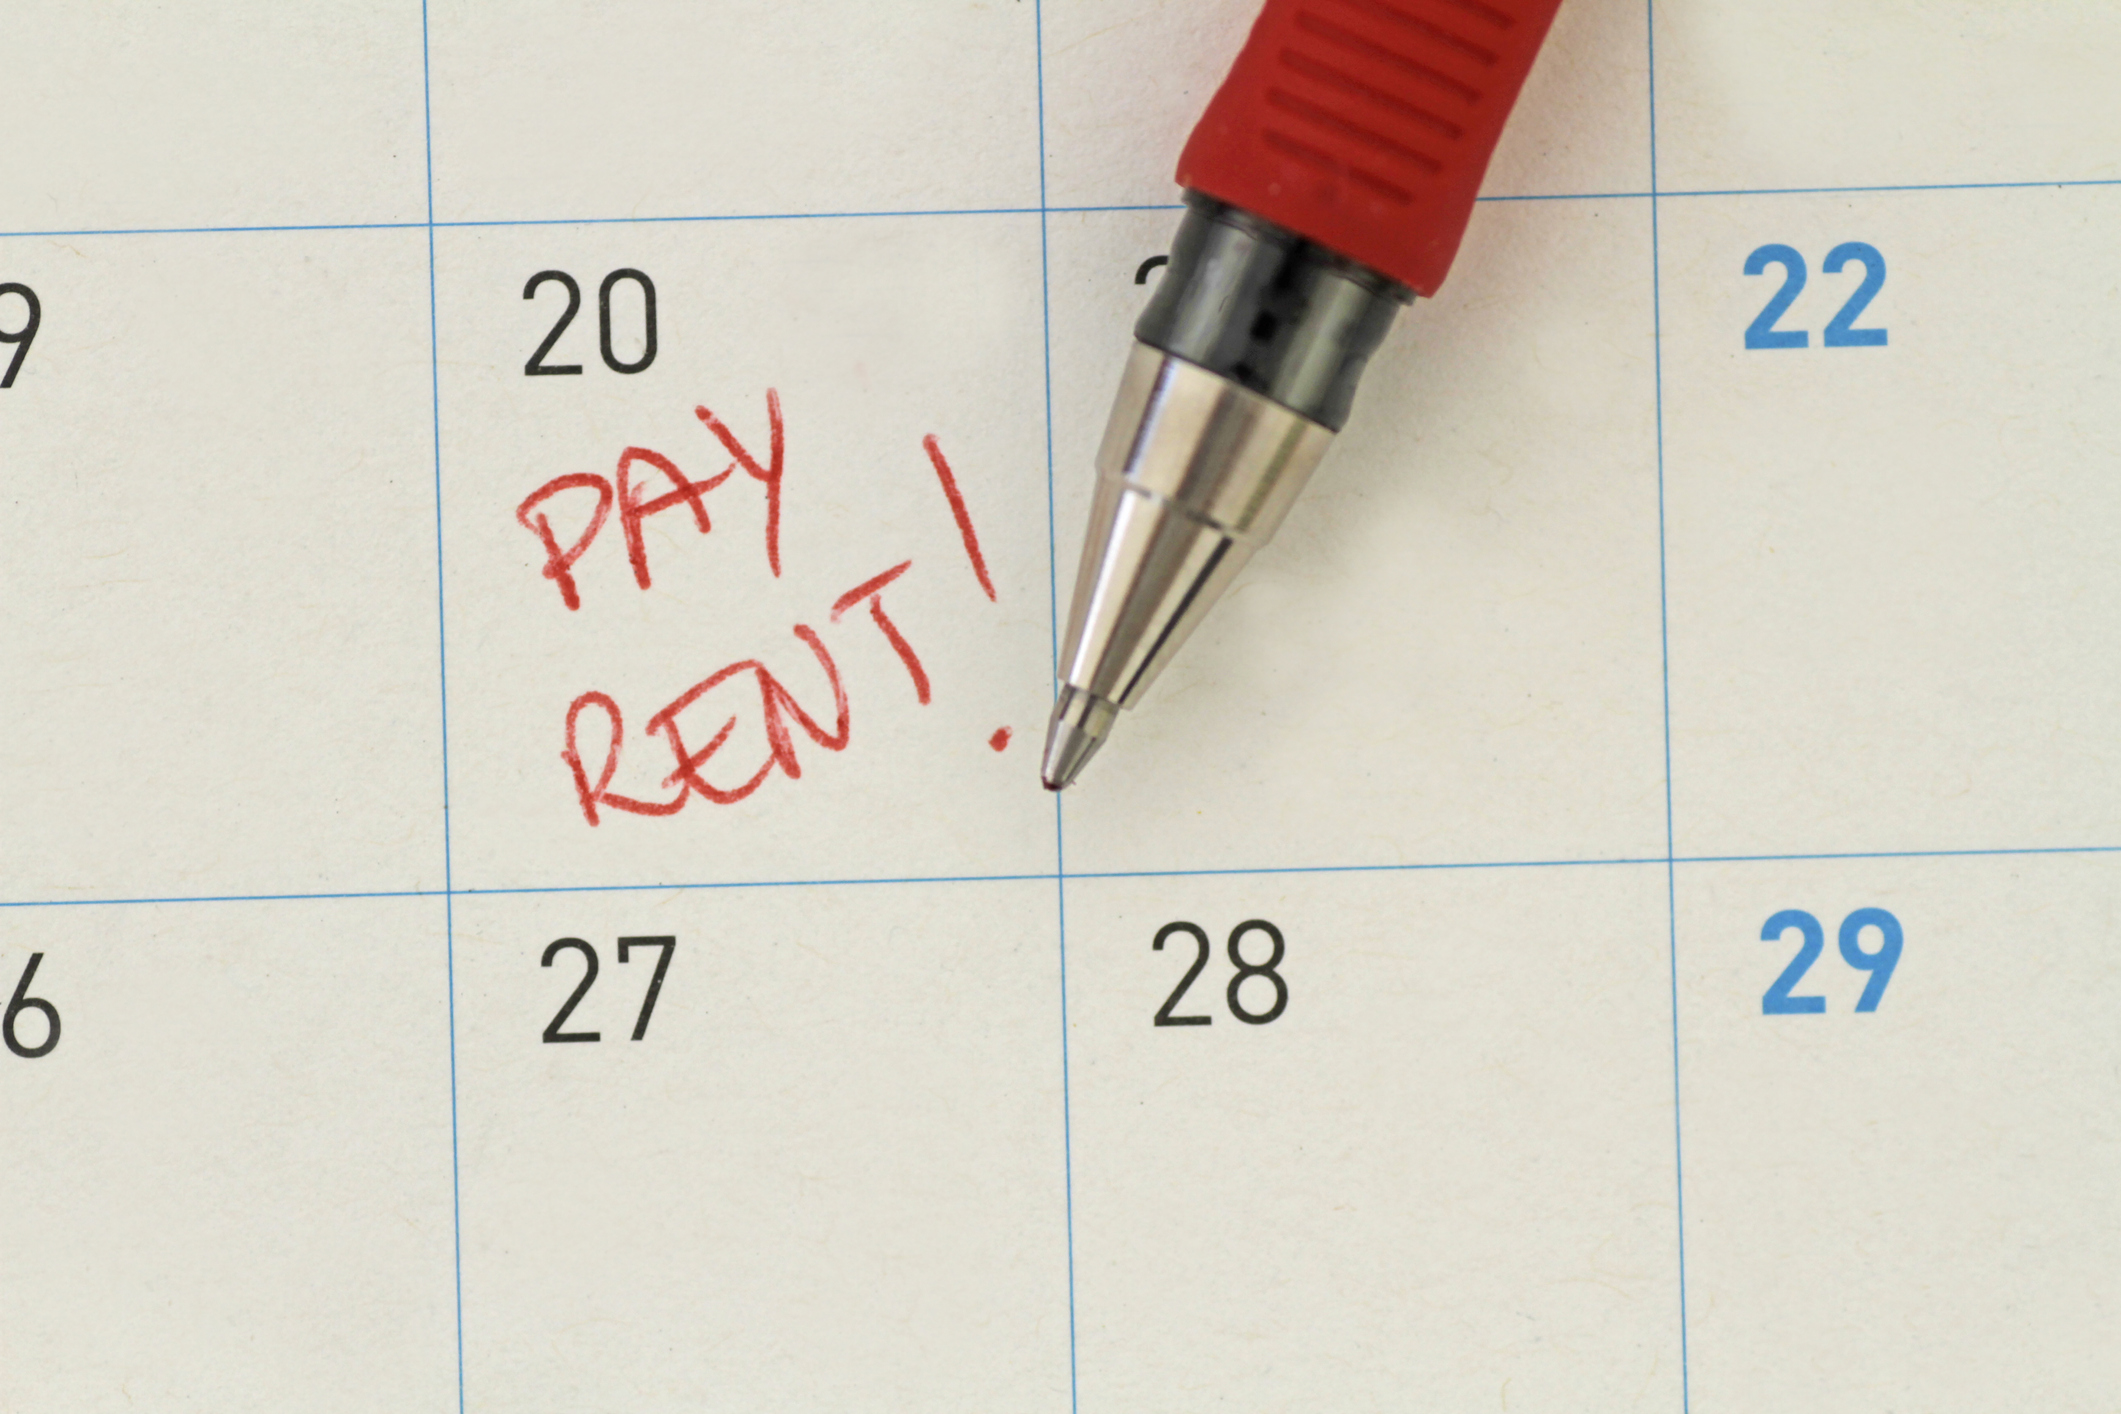 Renting rights